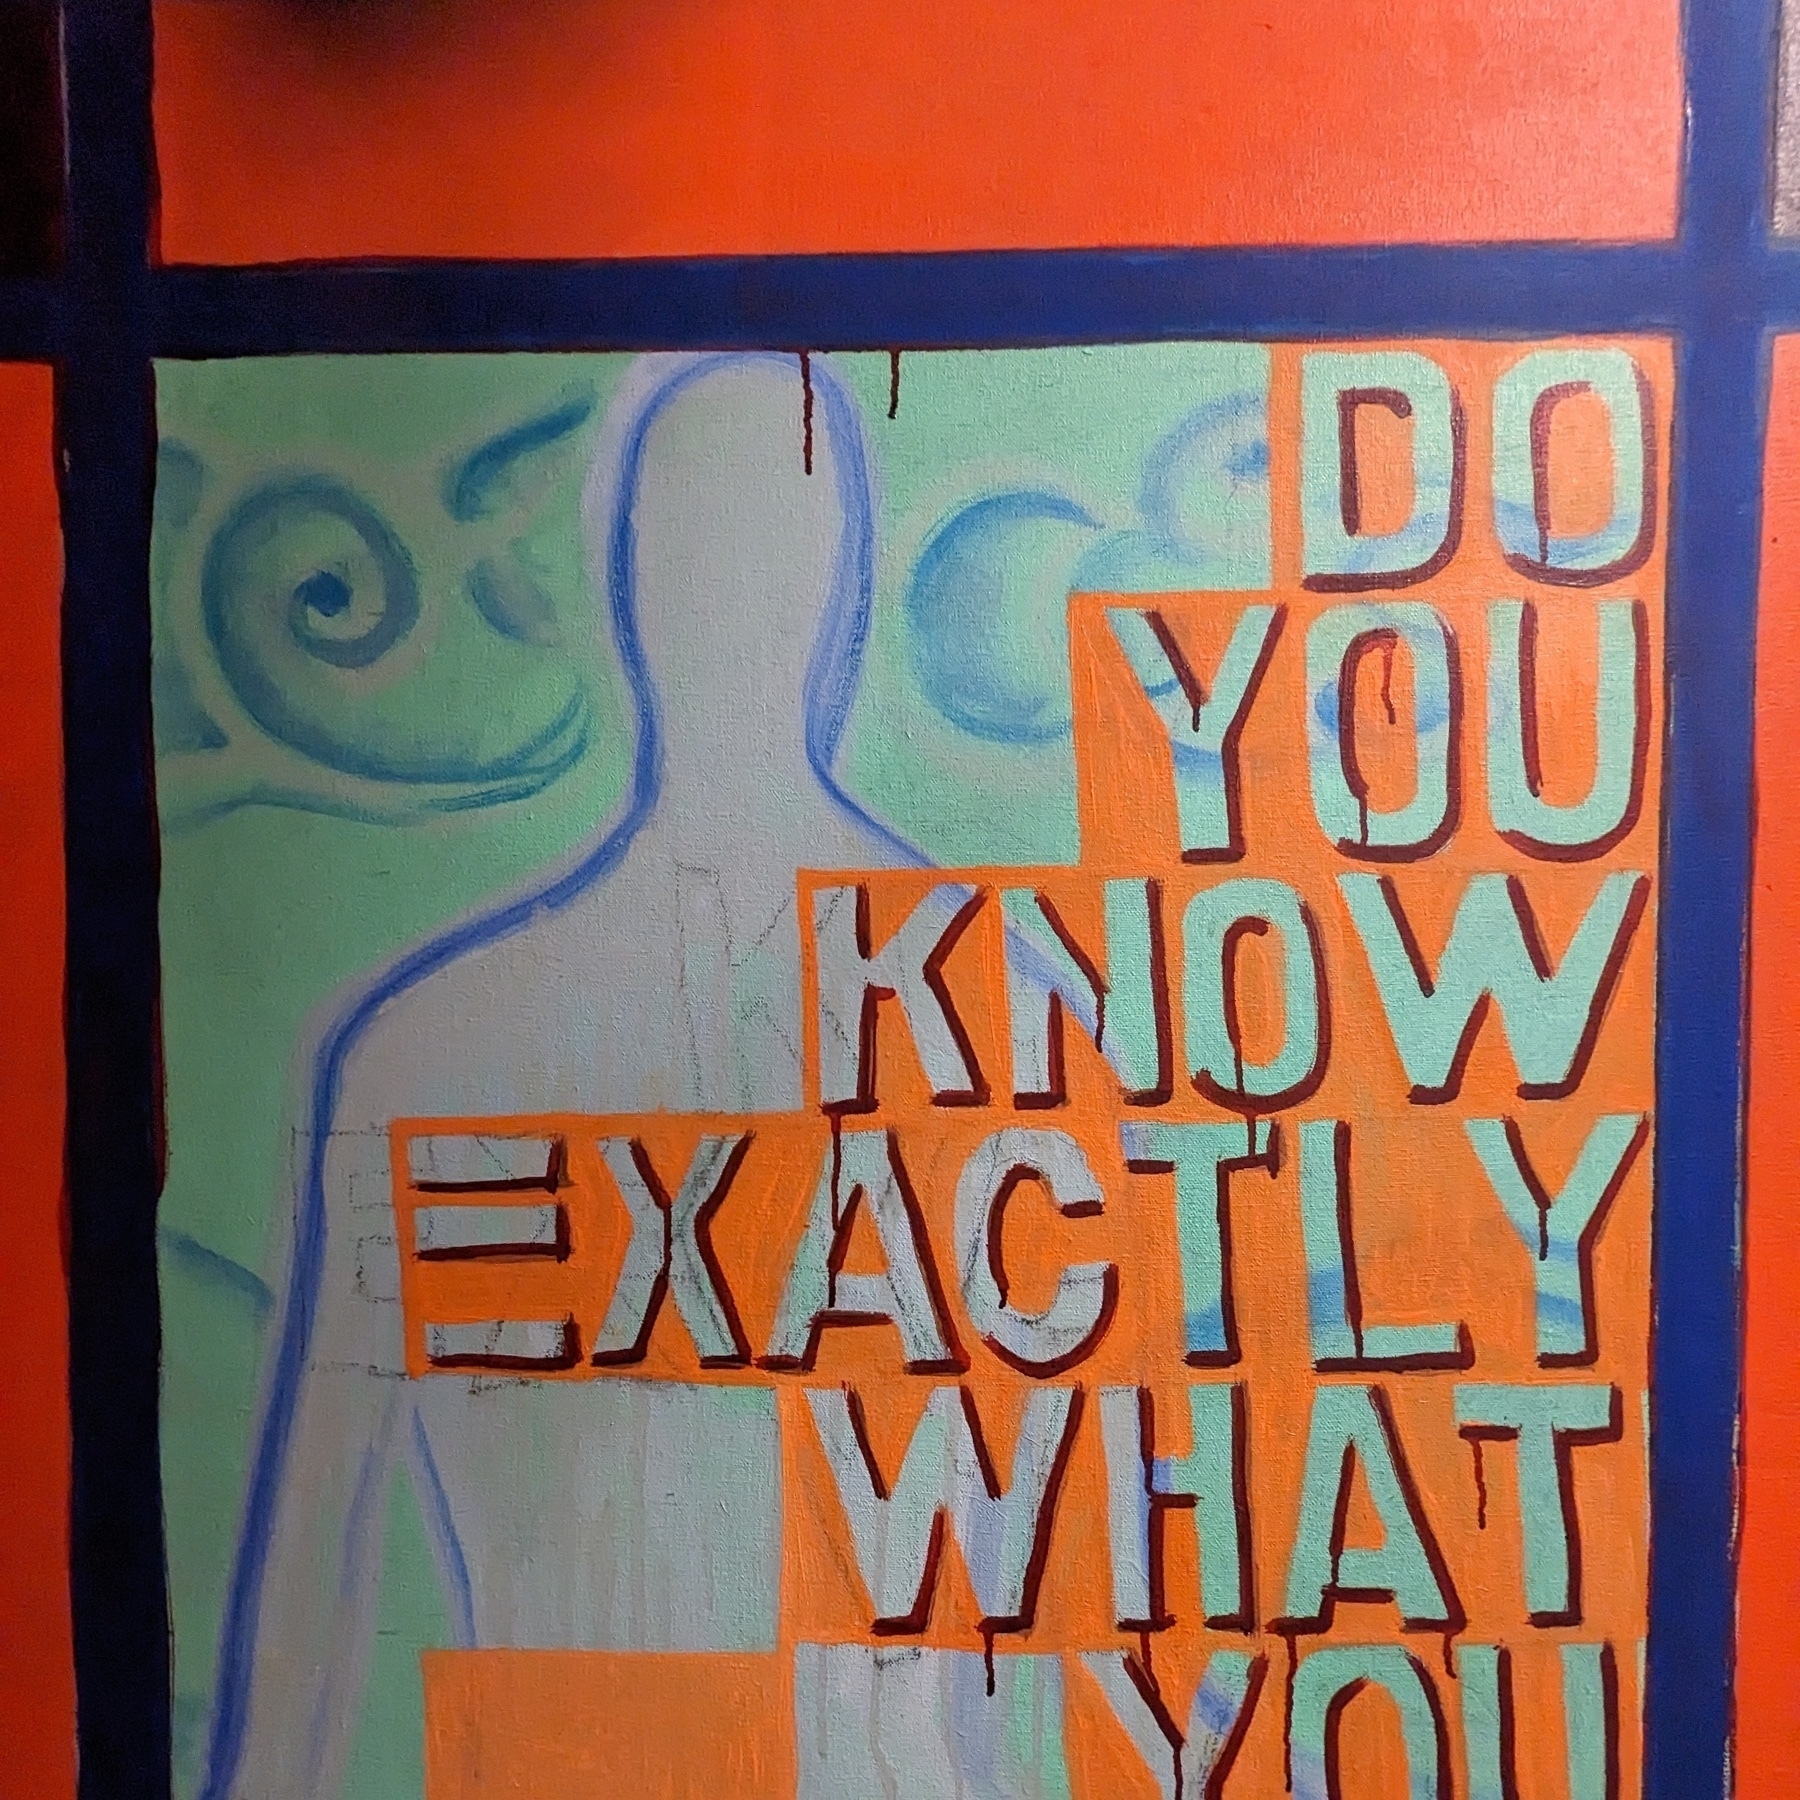 A stencilled painting with a shadowy figure behind the words, "Do you know exactly what you want?"